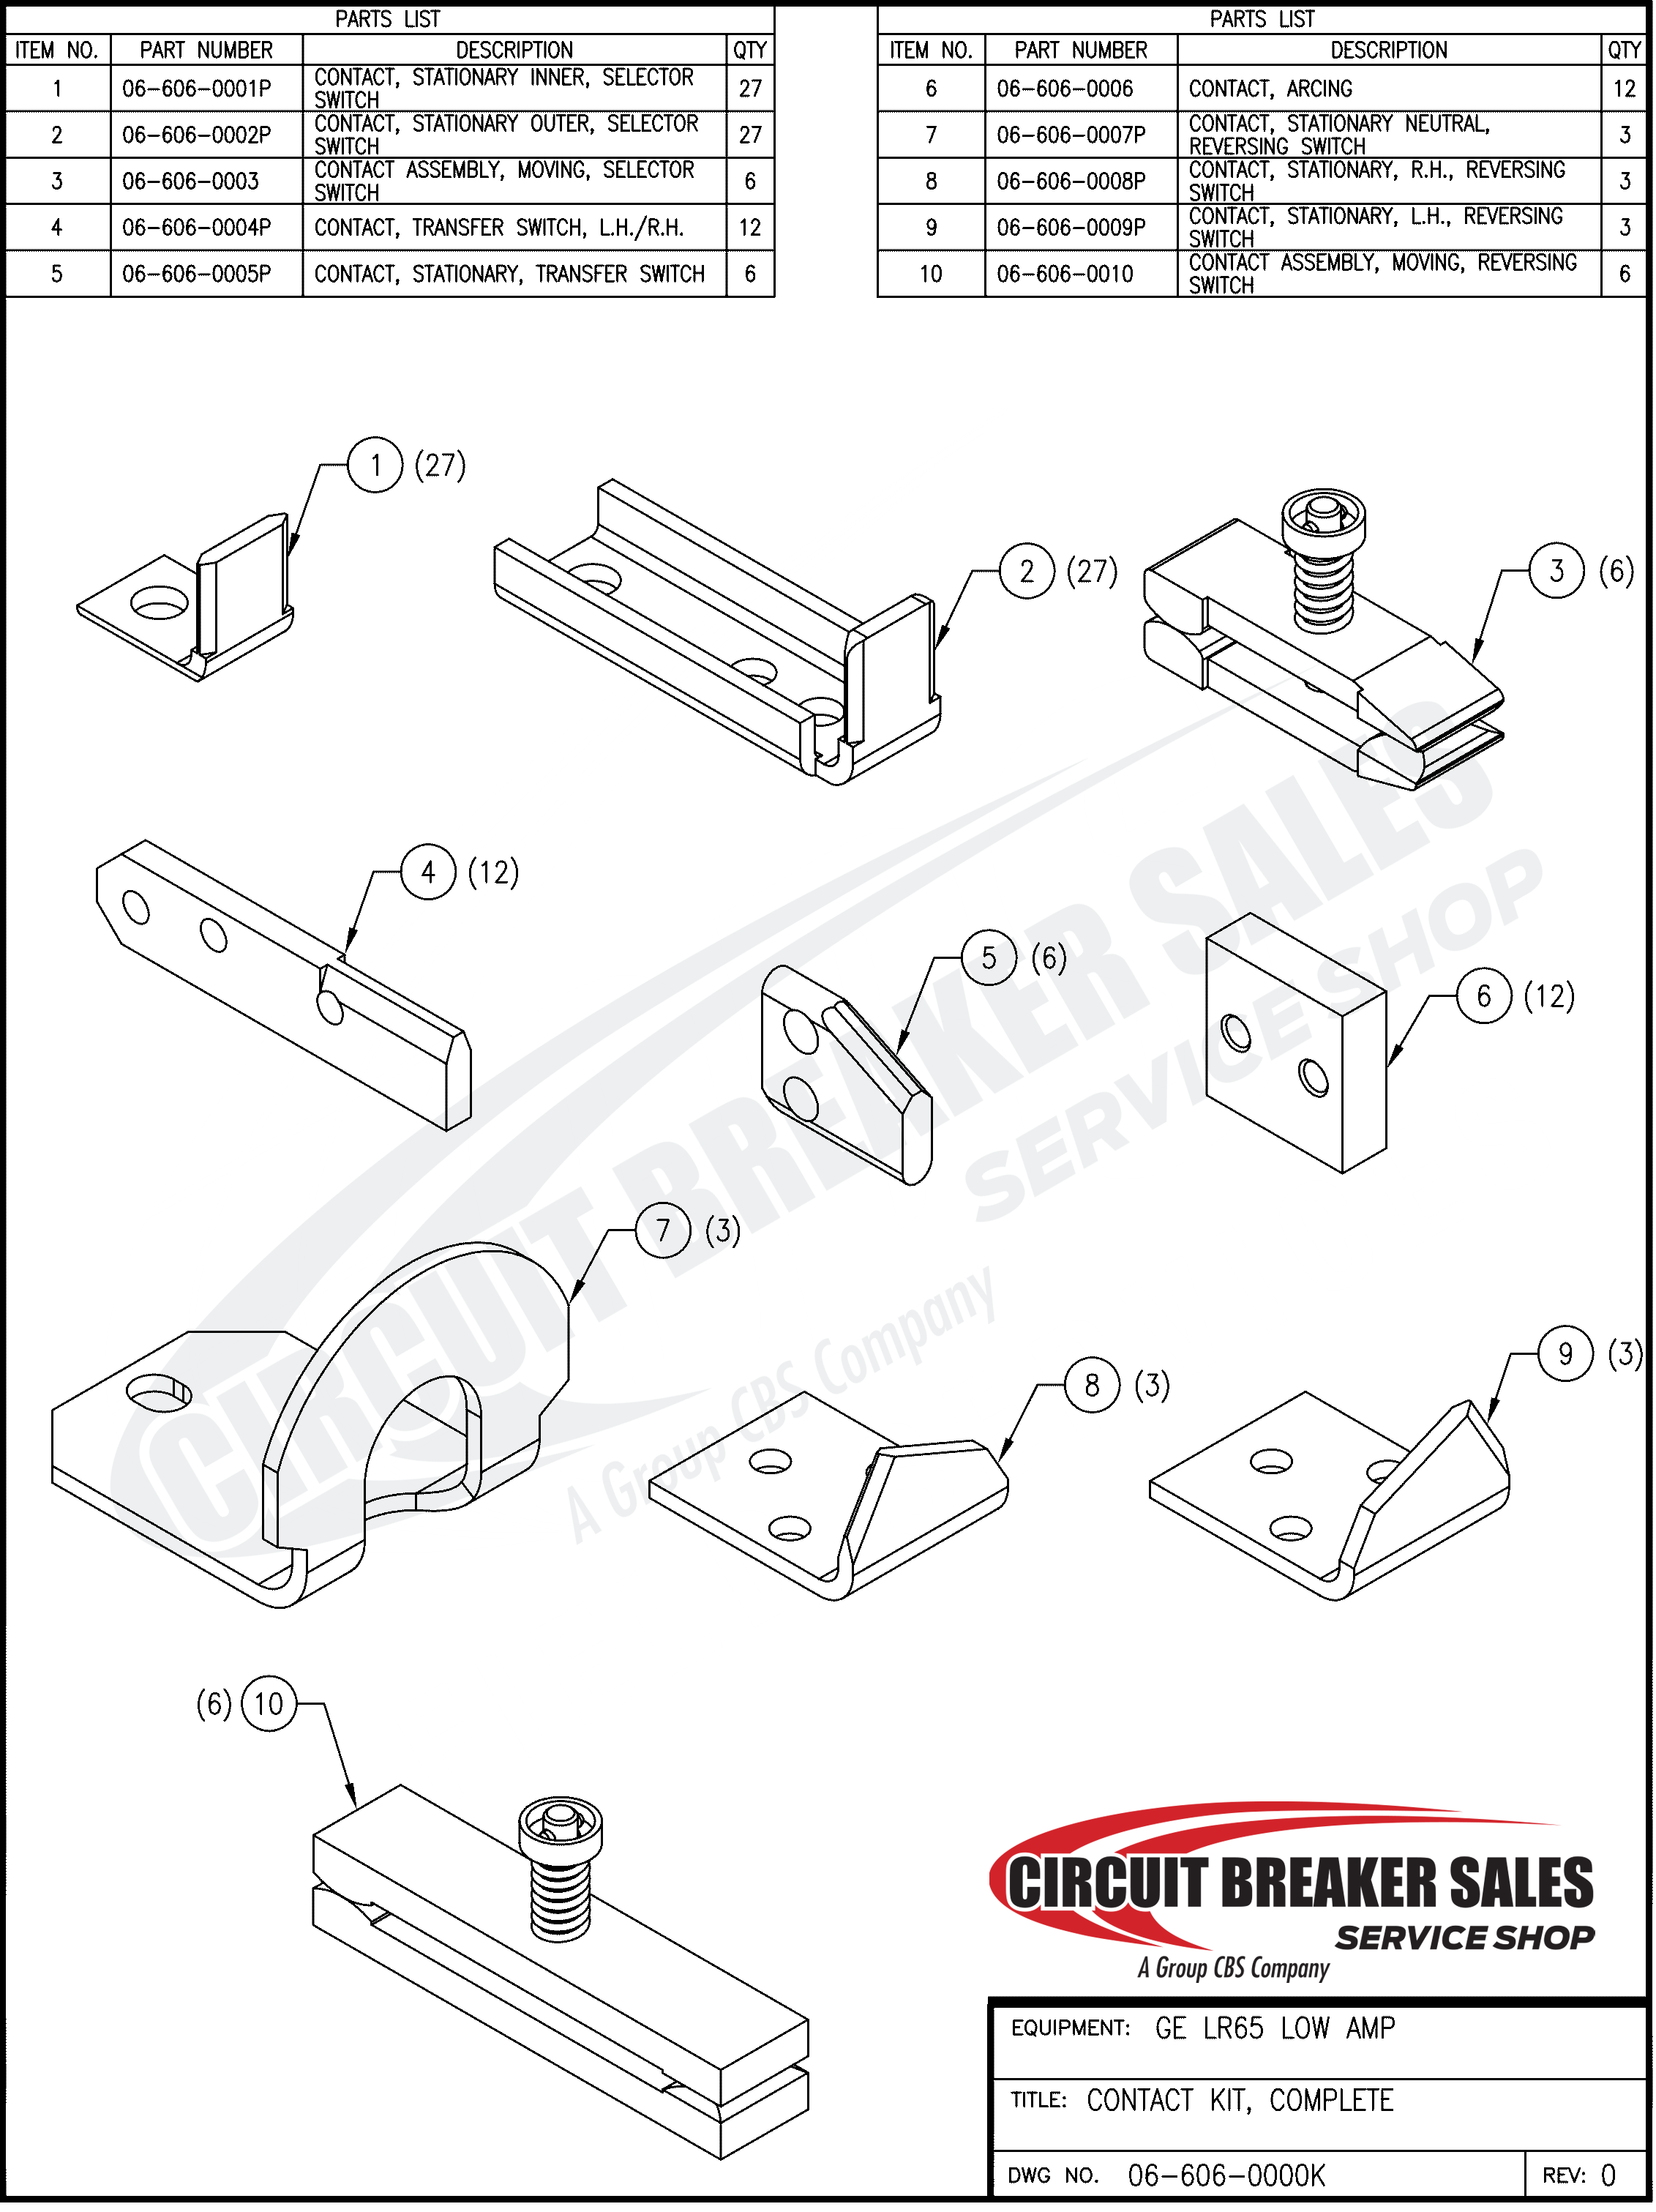 General Electric LR65 Low Amp Series Kit - Contact Kit For General Electric LR65 Low Amp